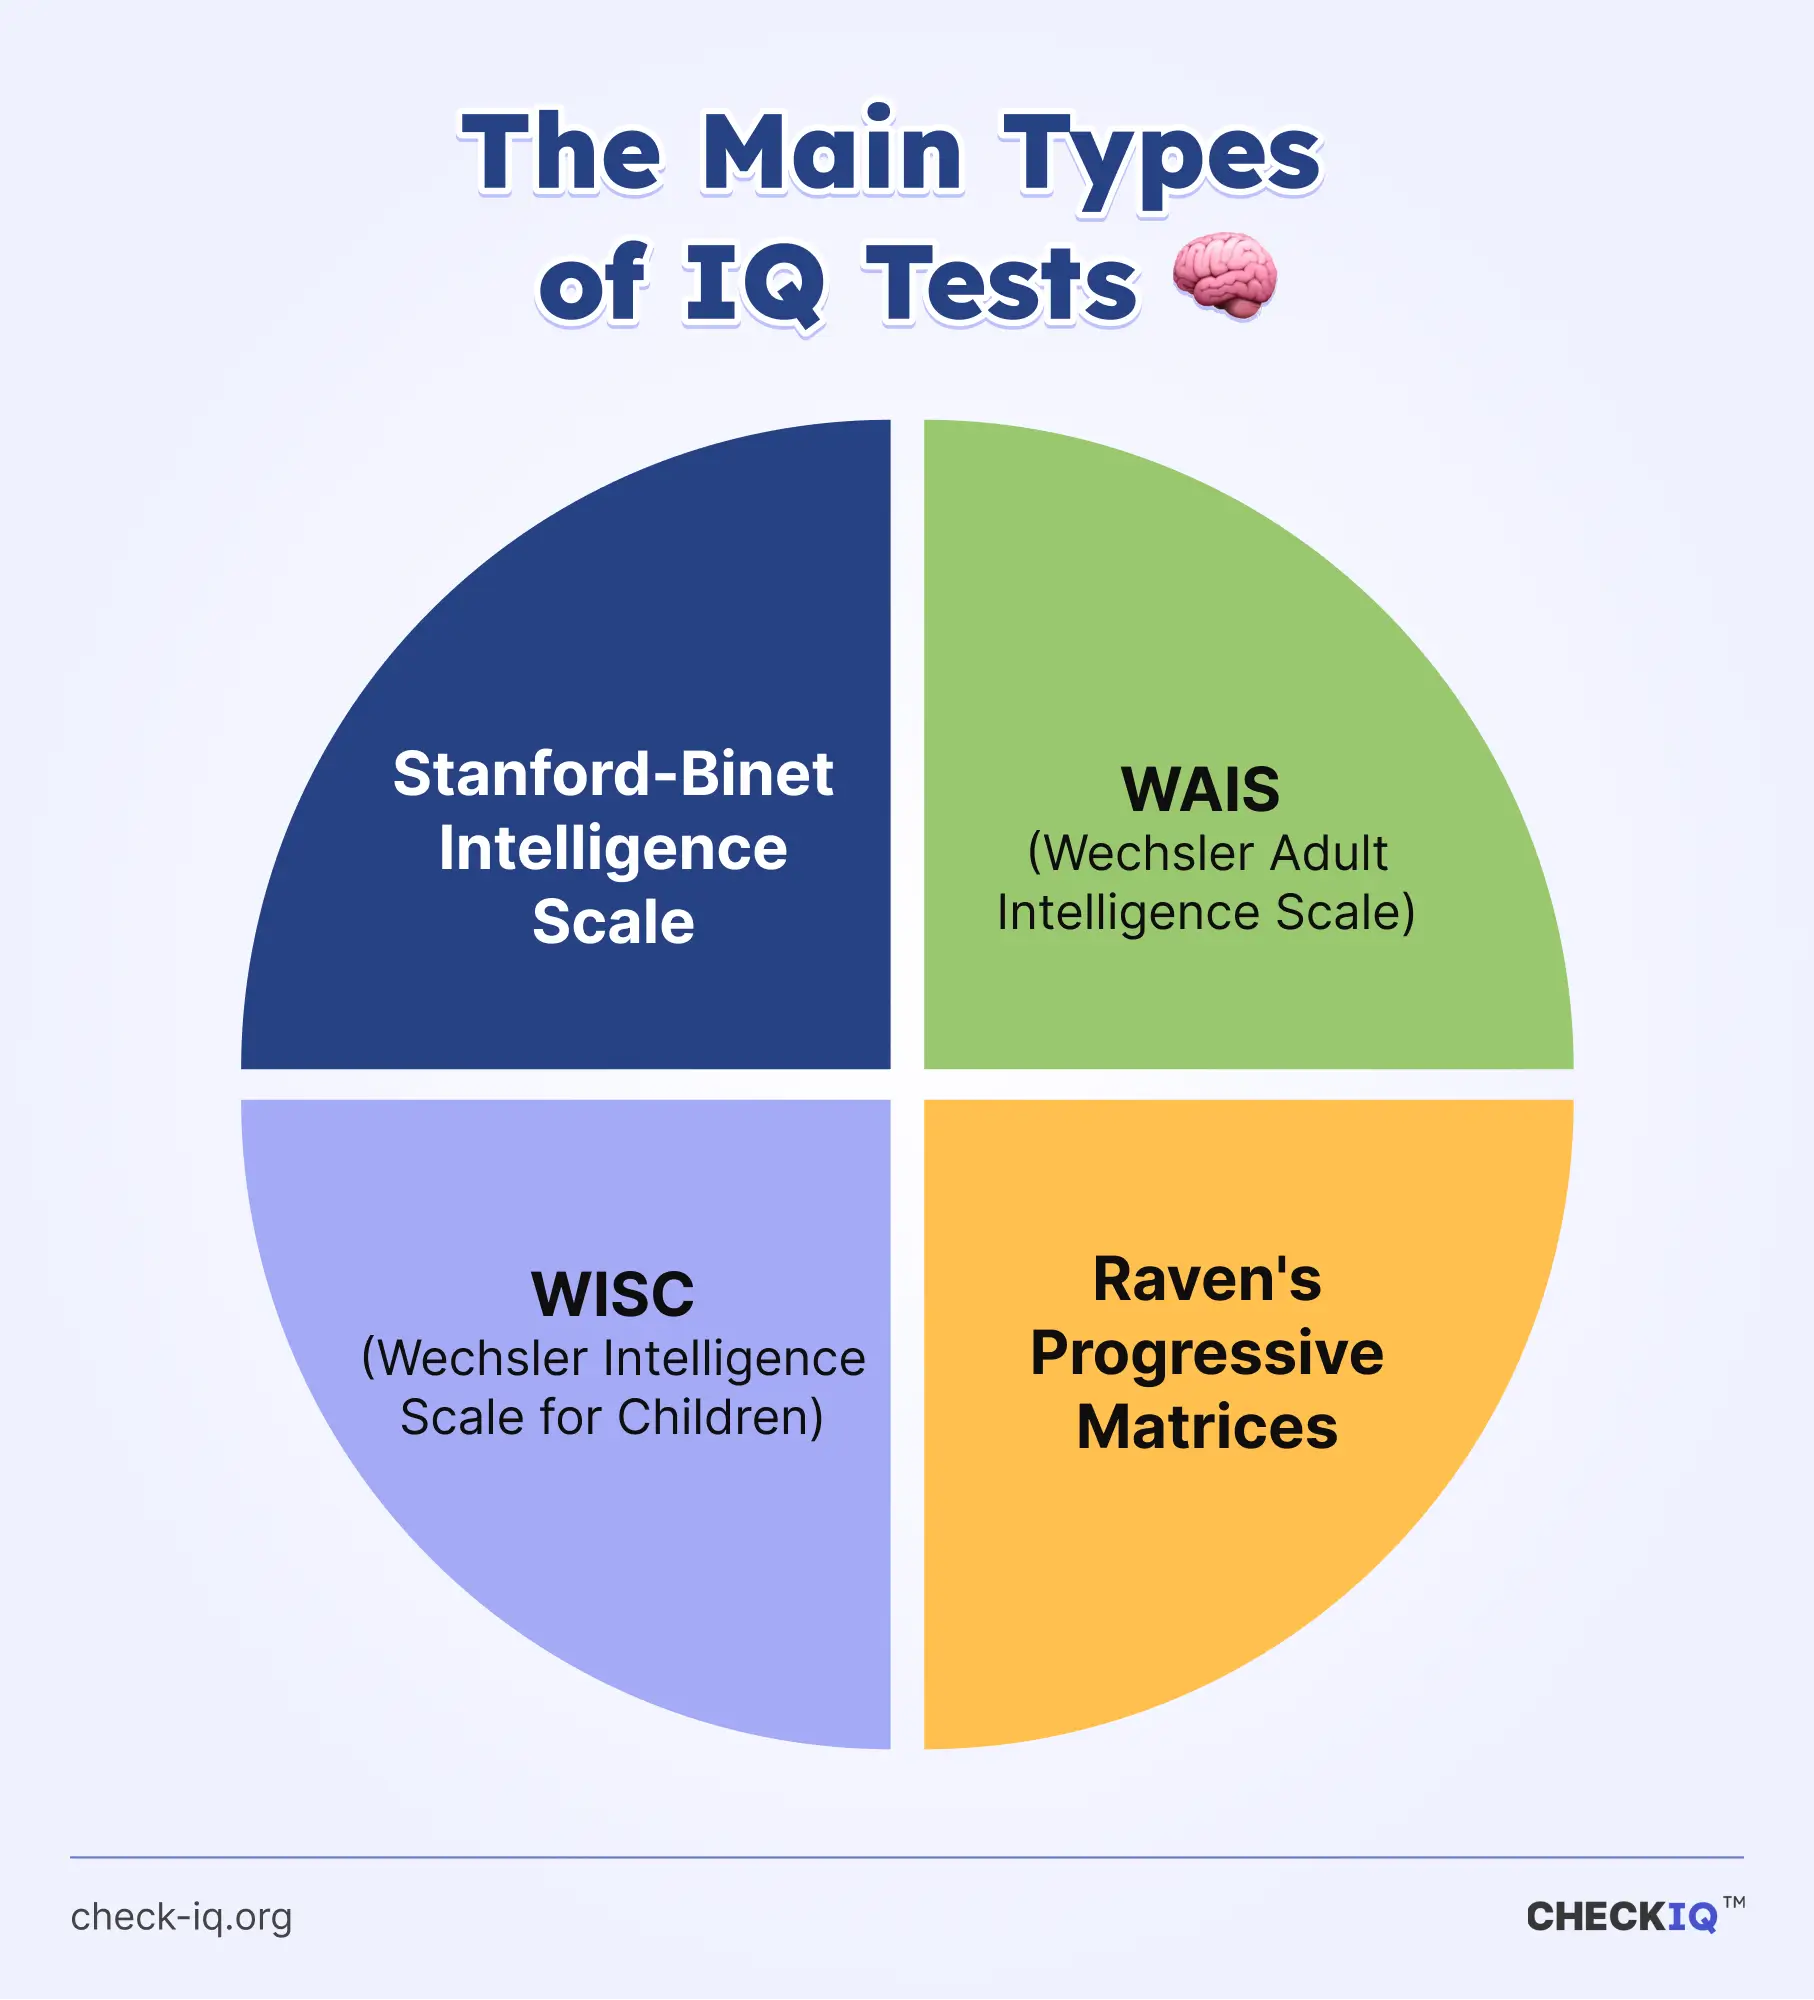 Different types of IQ tests: Stanford-Binet, WAIS, WISC, and Raven's Progressive Matrices IQ tests